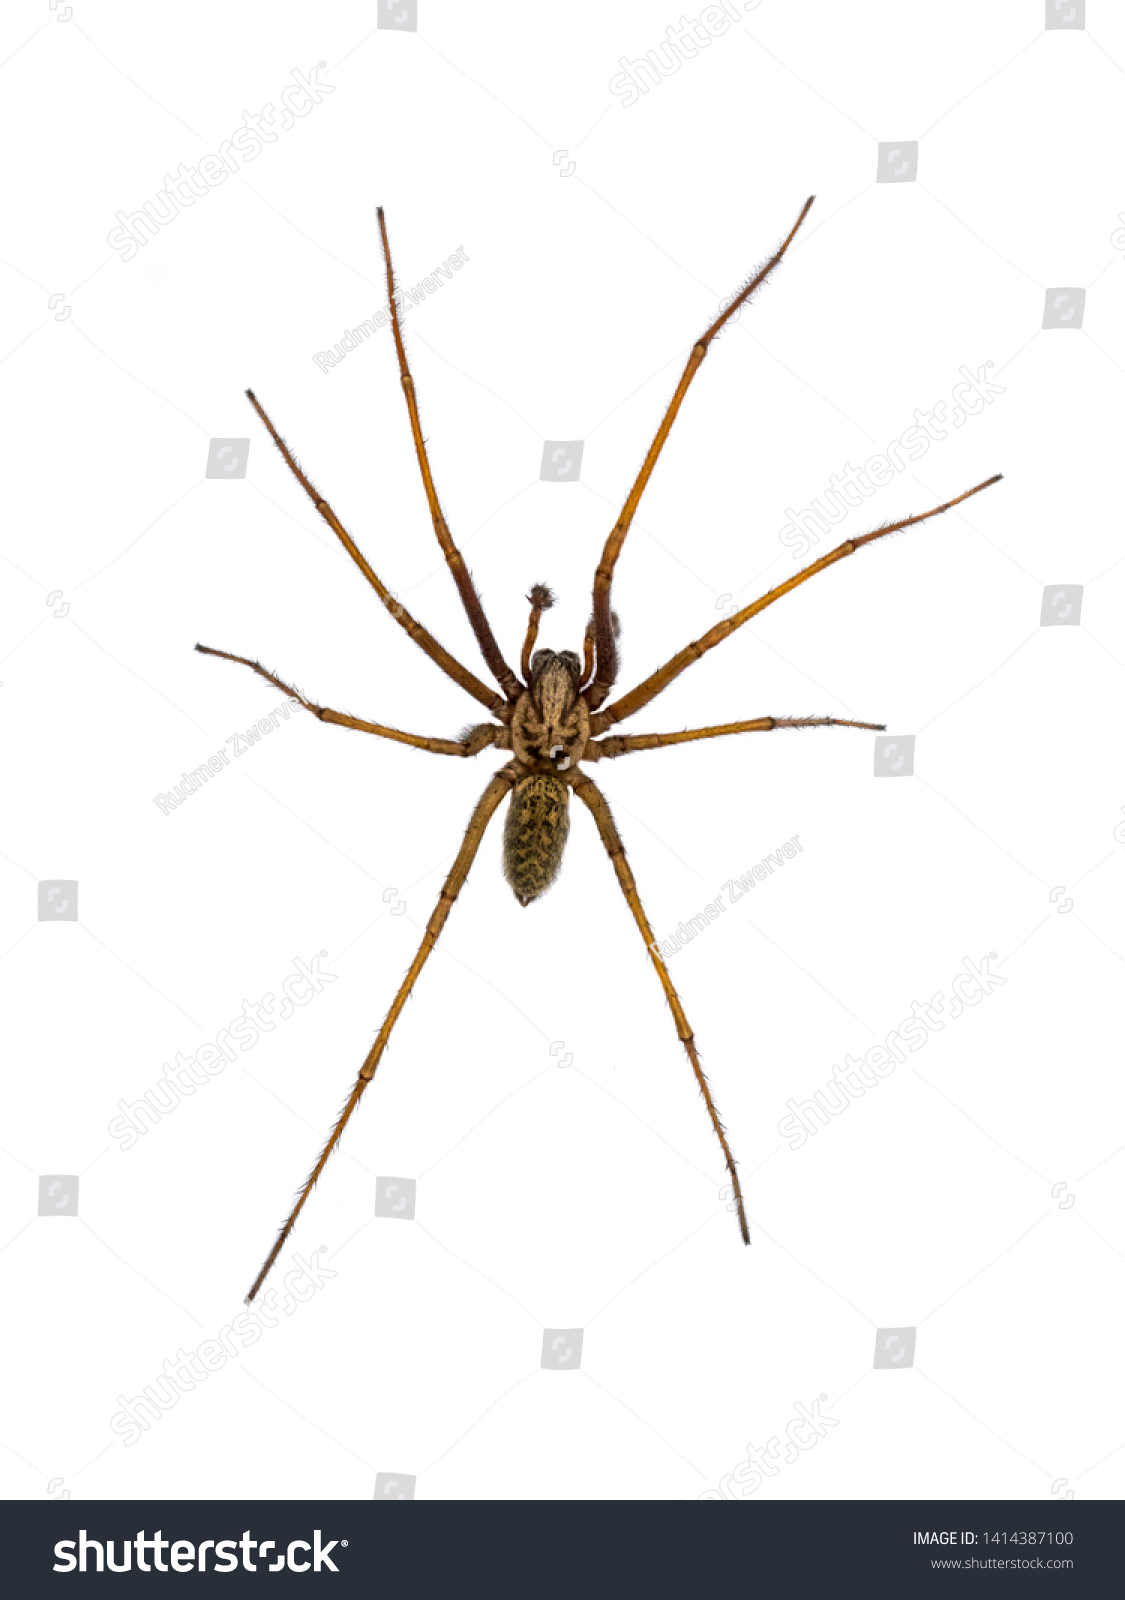 Giant house spider (Eratigena atrica) top down view of arachnid with long hairy legs isolated on white background #1414387100